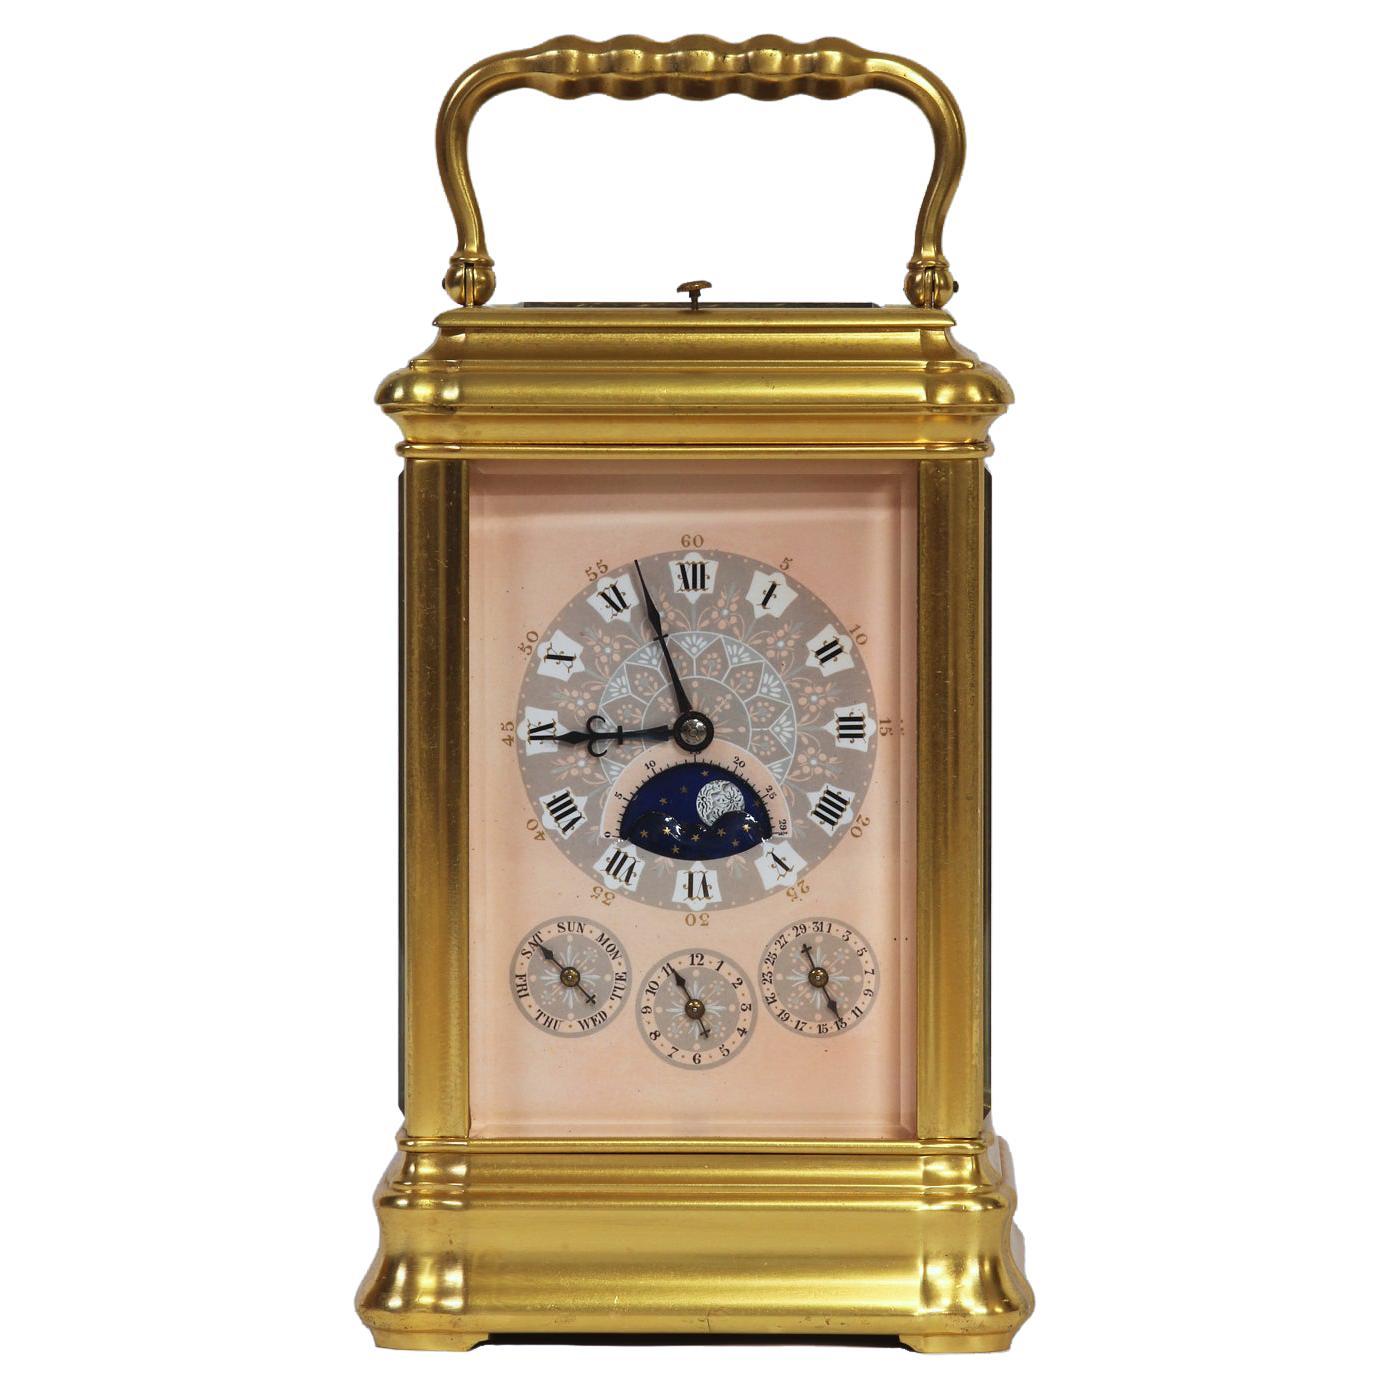 c.1875 French Gilt-Bronze Grand-Sonnerie Multi-Dial Carriage Clock